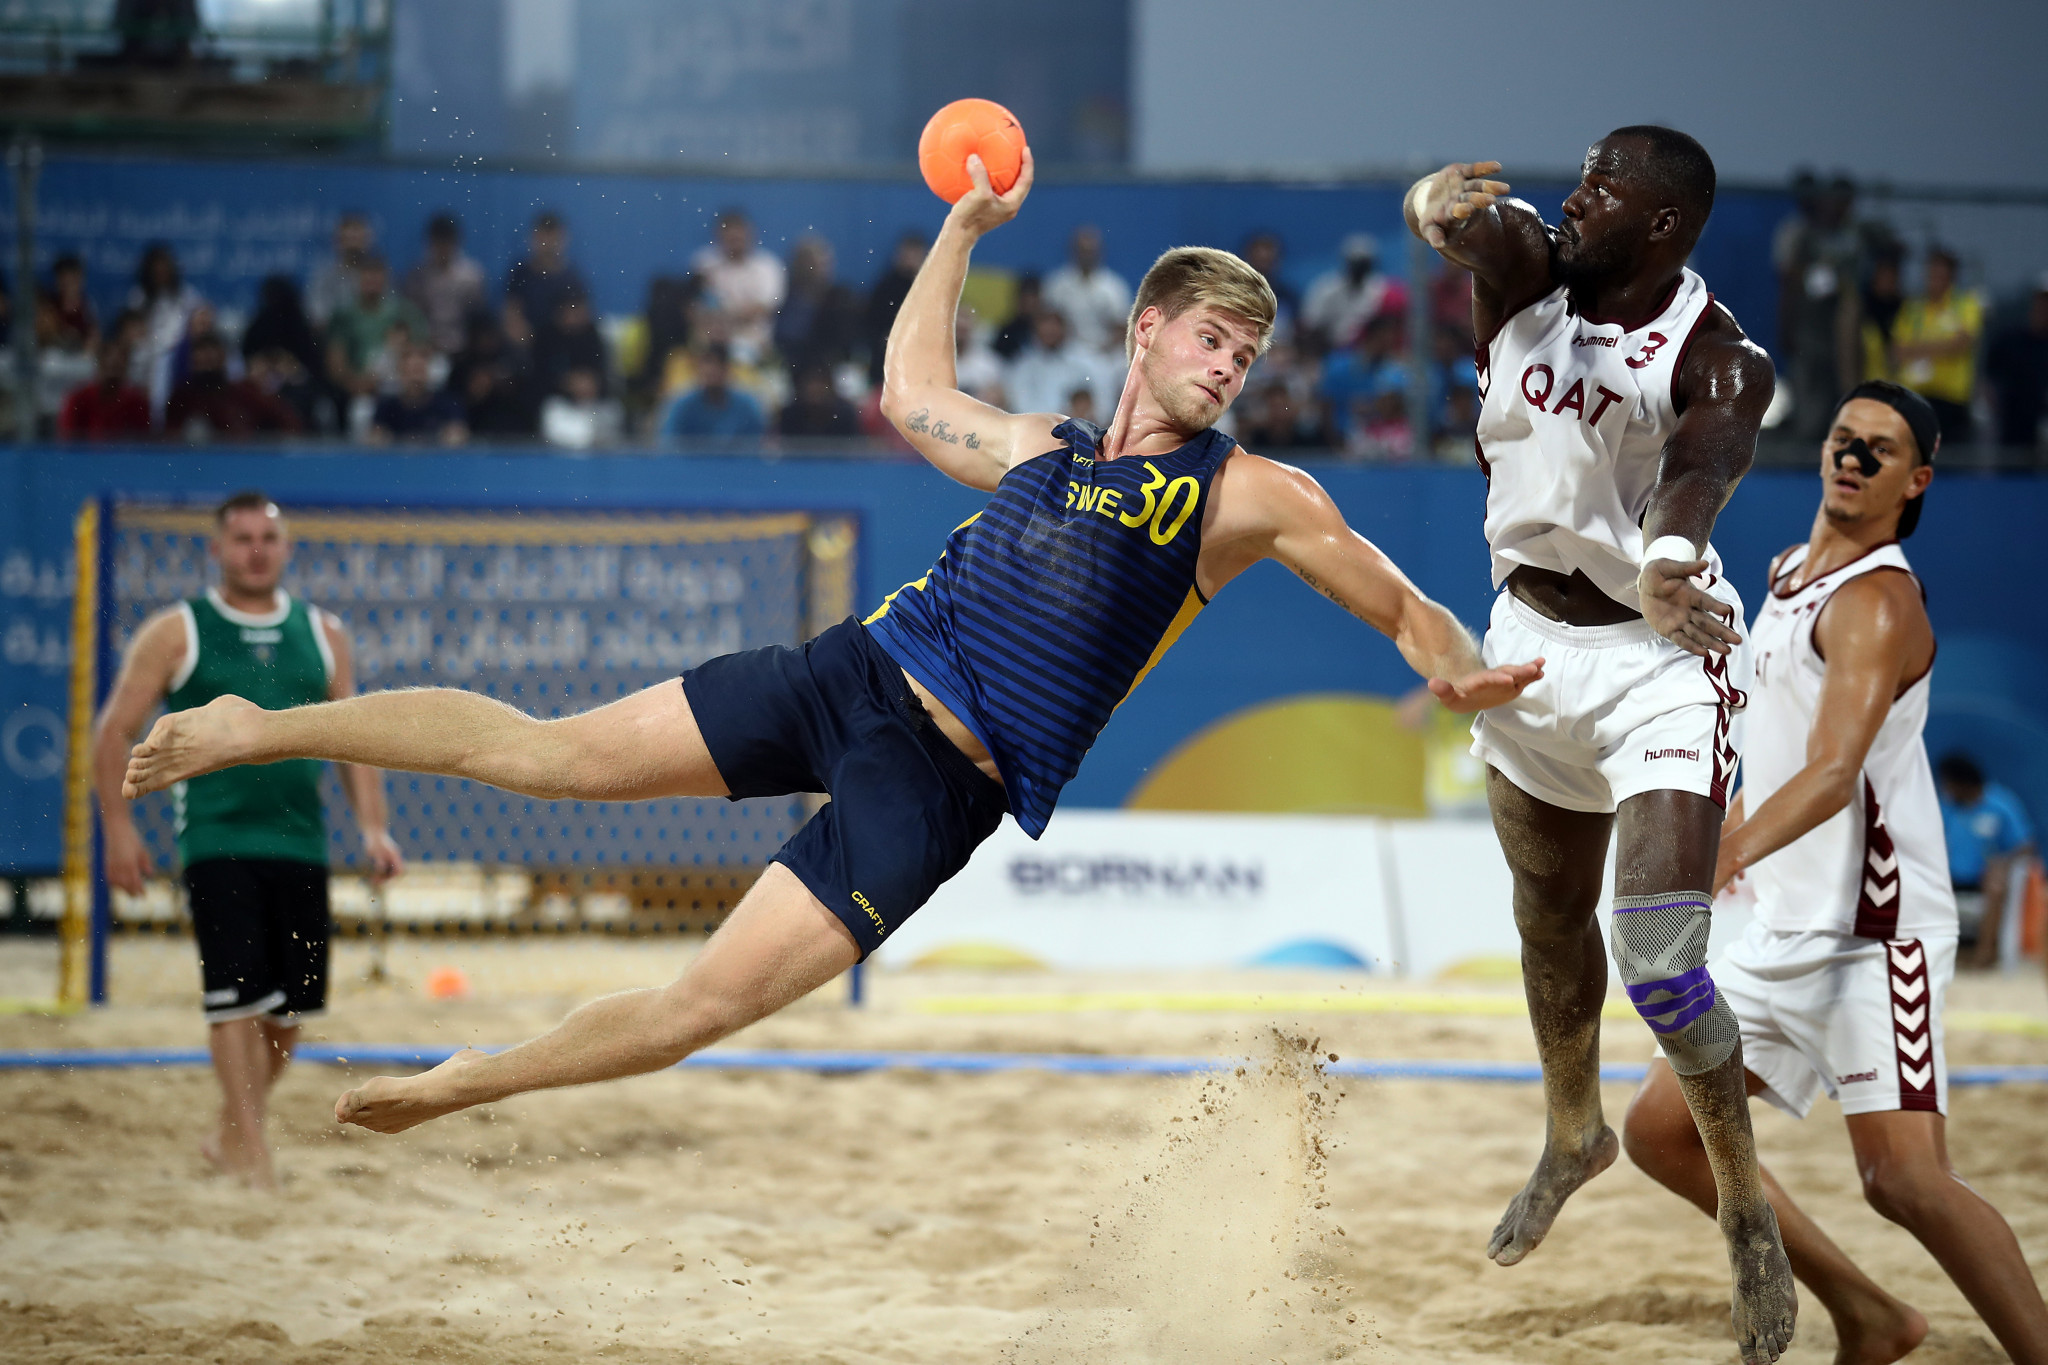 Beach handball has been proposed for inclusion at Paris 2024 ©Getty Images